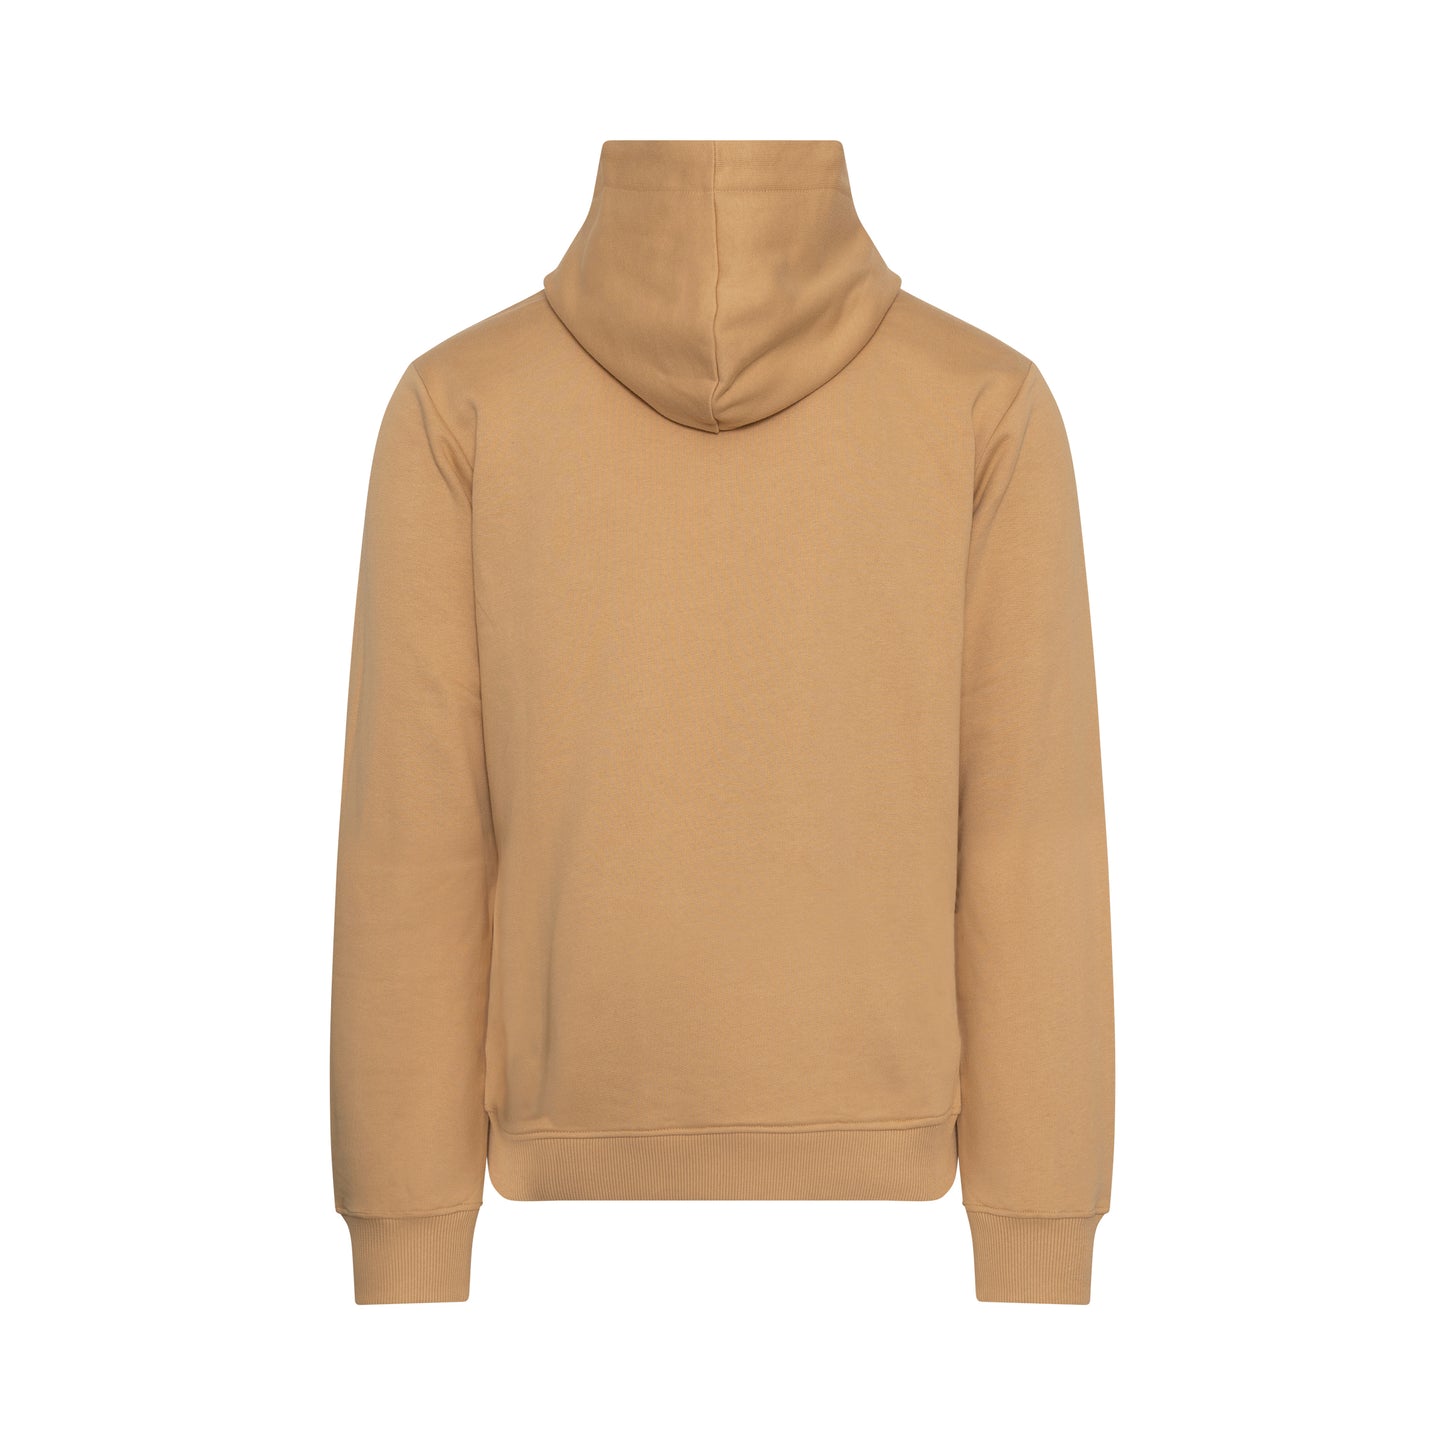 Tiger Embroidered Hoodie in Beige